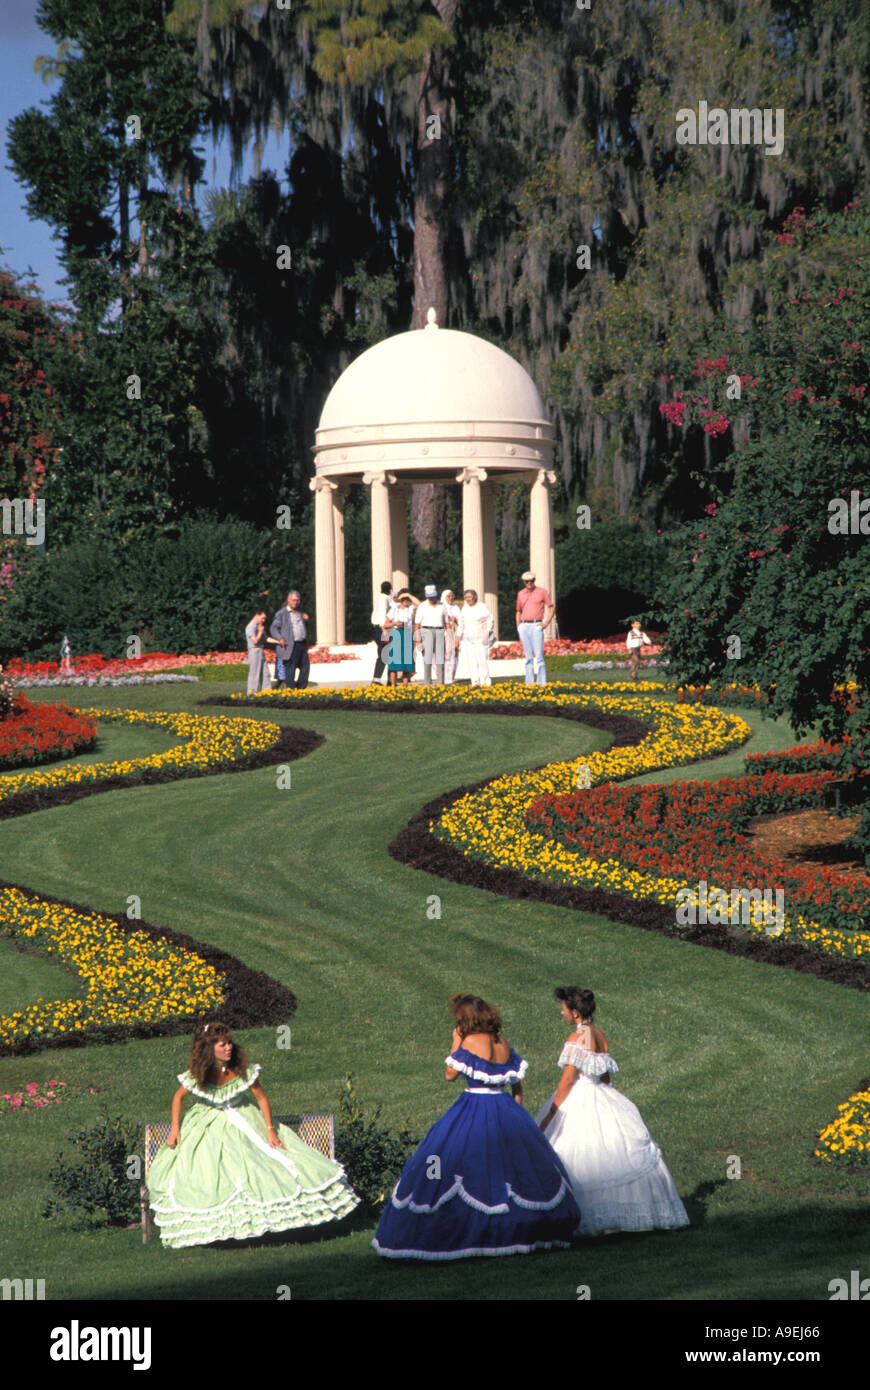 Florida USA Tourist Attractions Cypress Gardens Southern Belles flowers cupola Stock Photo